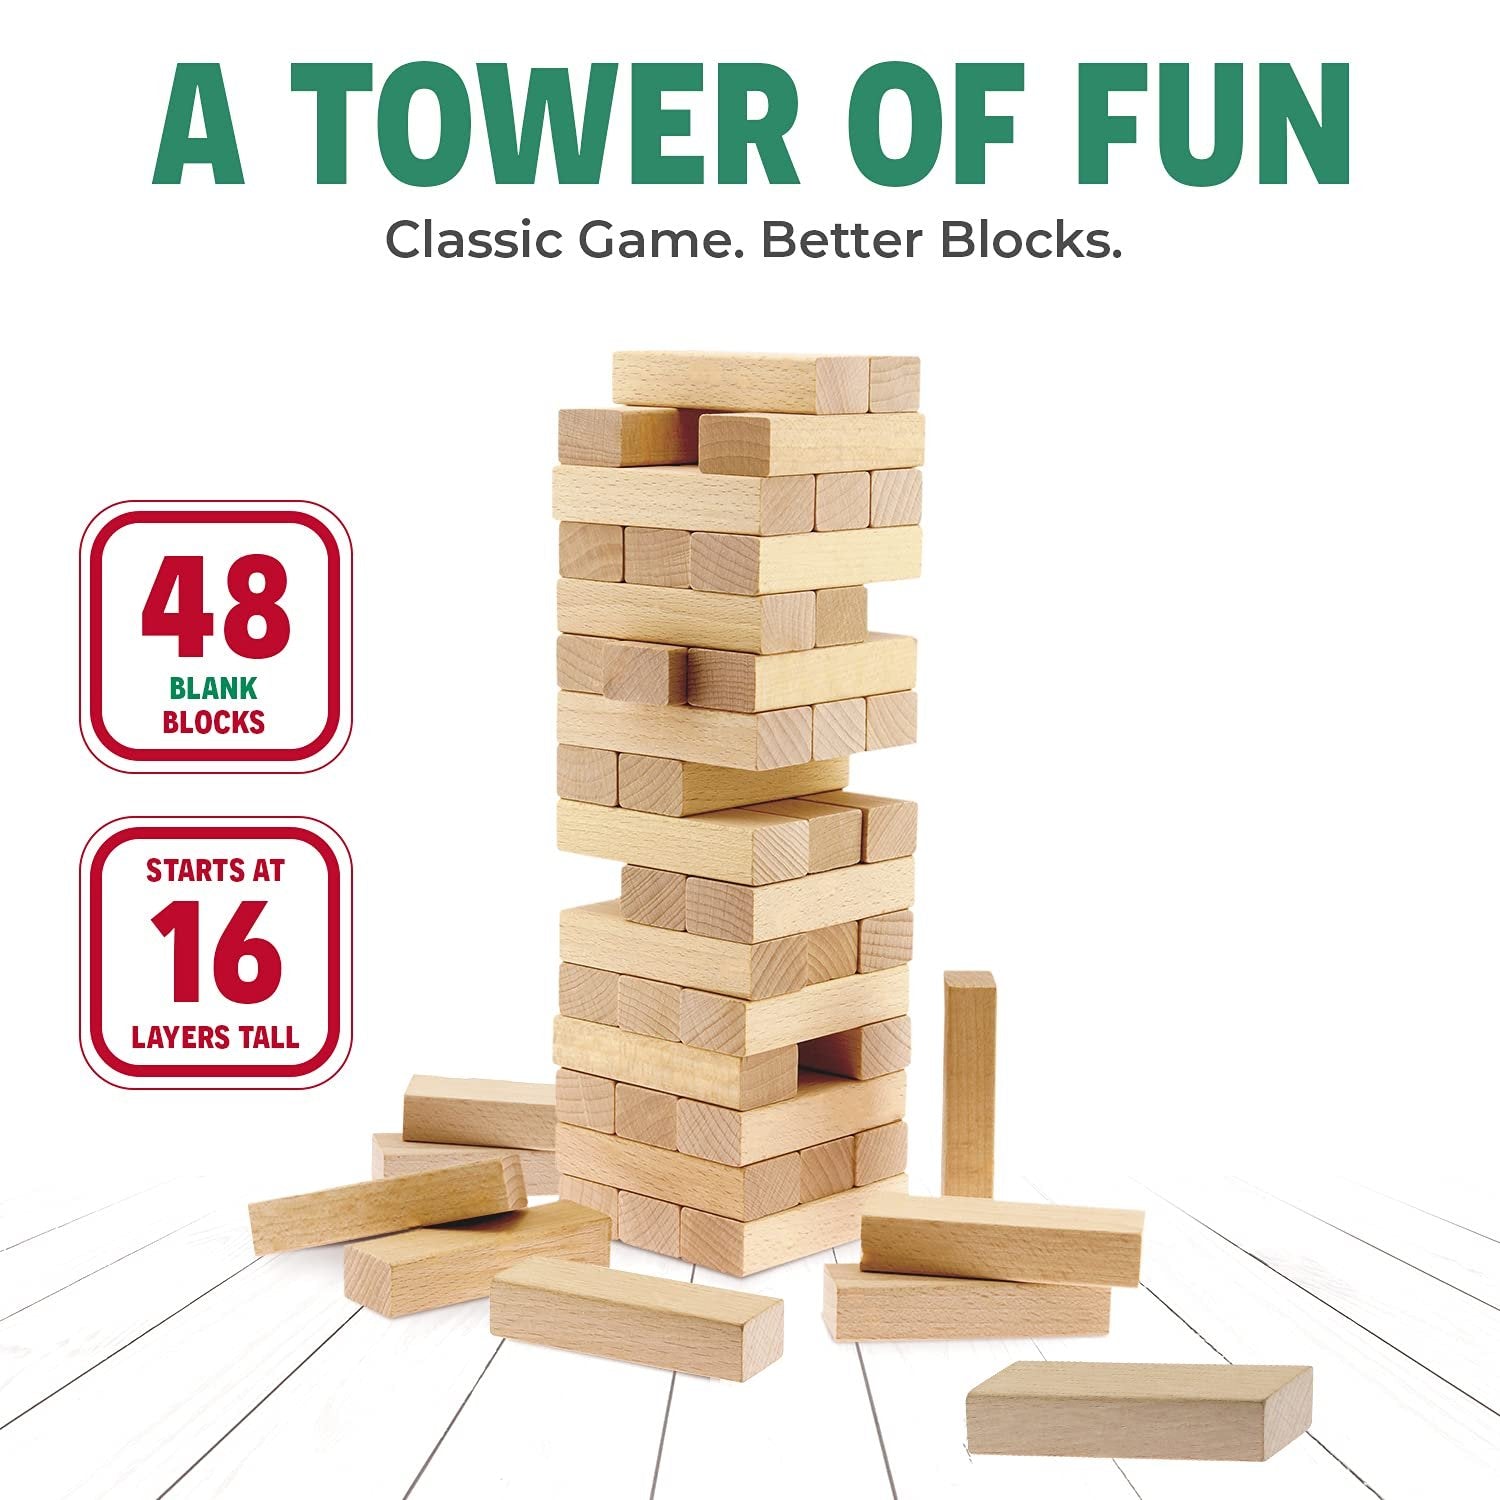 CoolToys Timber Tower Stacking Game - 48 Piece Wood Blocks - Original Edition - Size 1 Pack